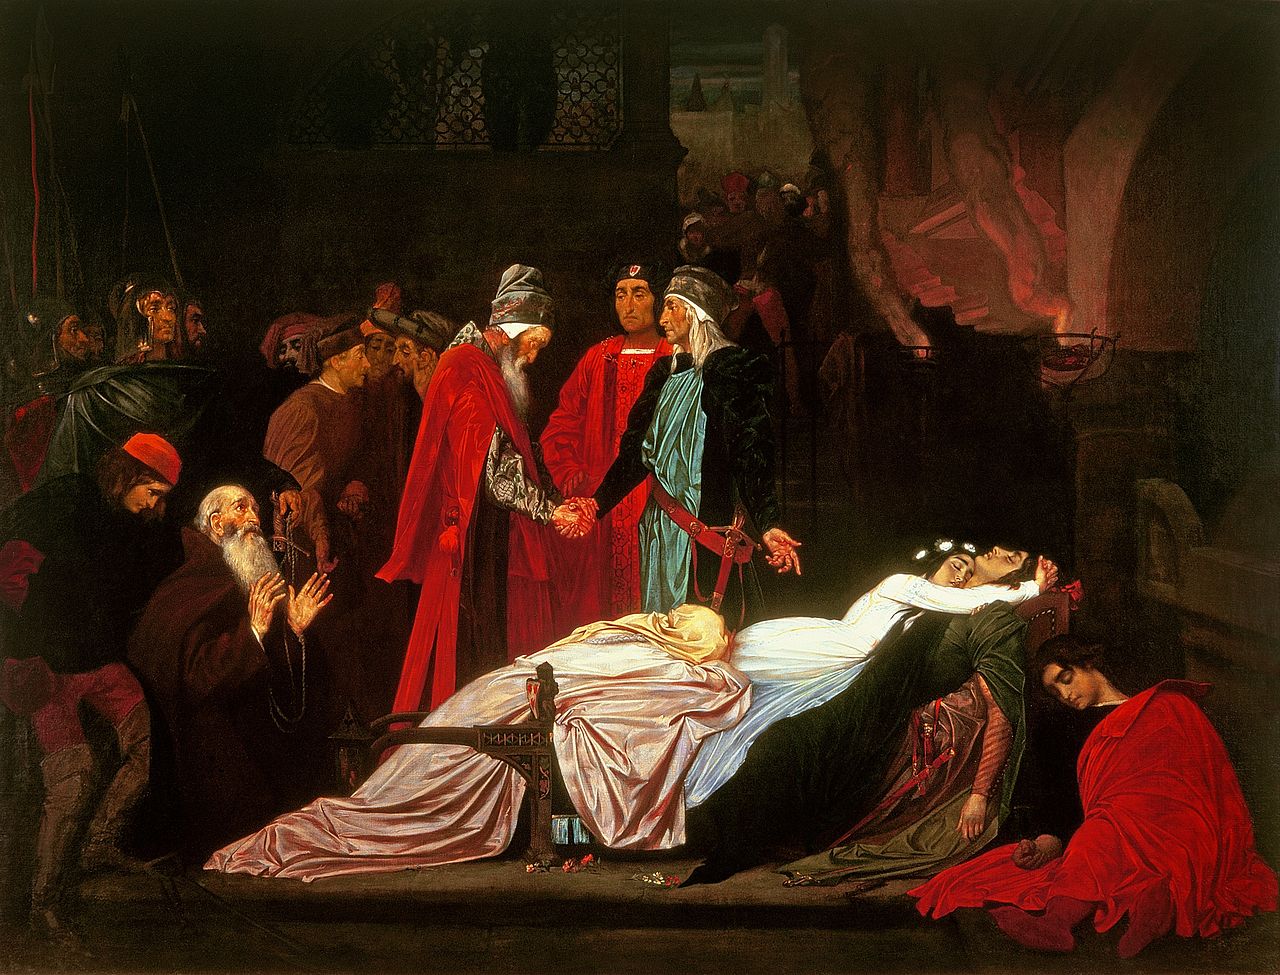 1280px Frederic Leighton The Reconciliation of the Montagues and the Capulets over the Dead Bodies of Romeo and Juliet